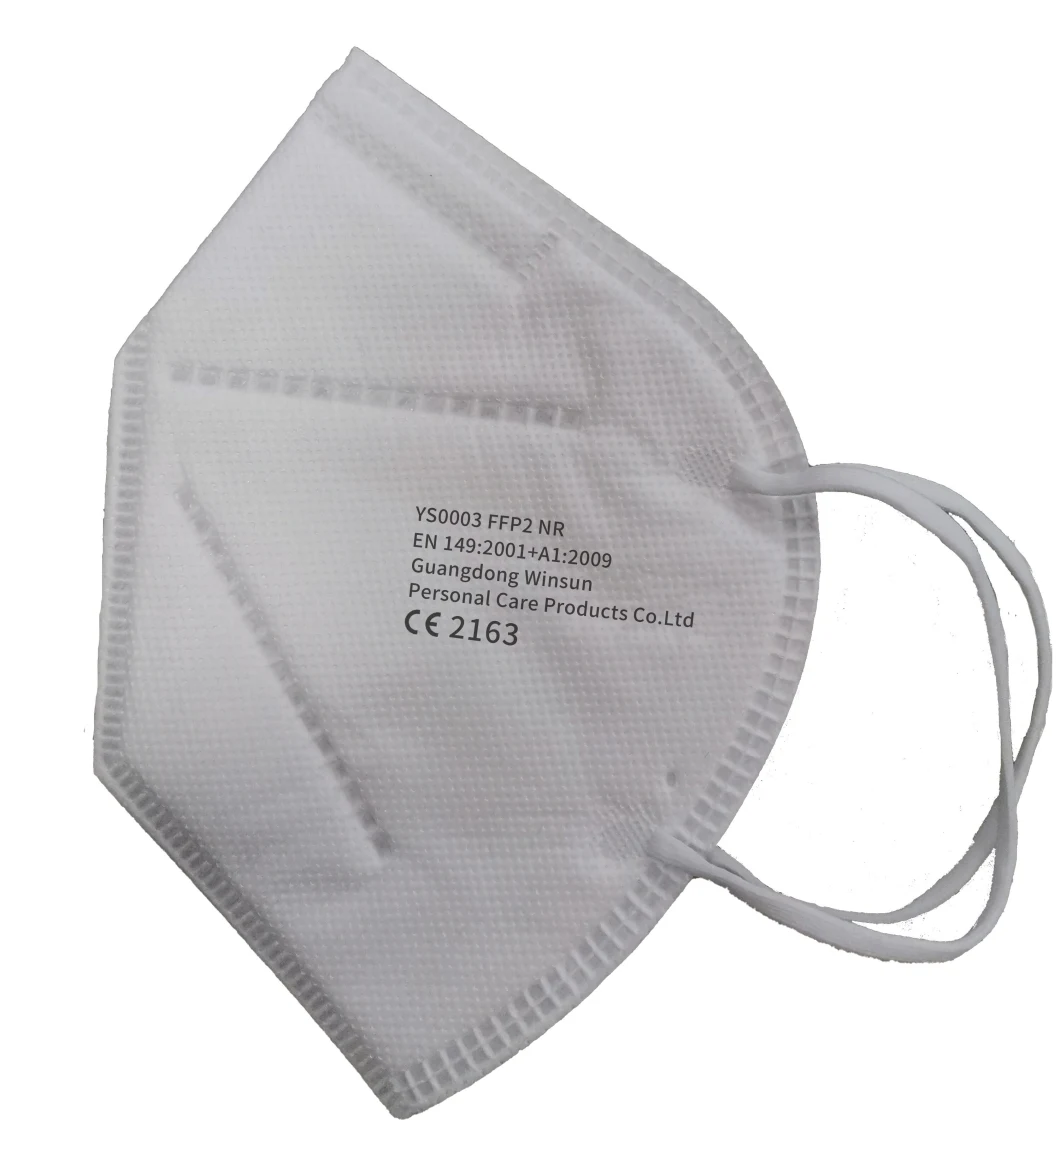 Stocked Factory Manufactured 5 Ply Protective FFP2 Facial Mask Filtering Half Mask